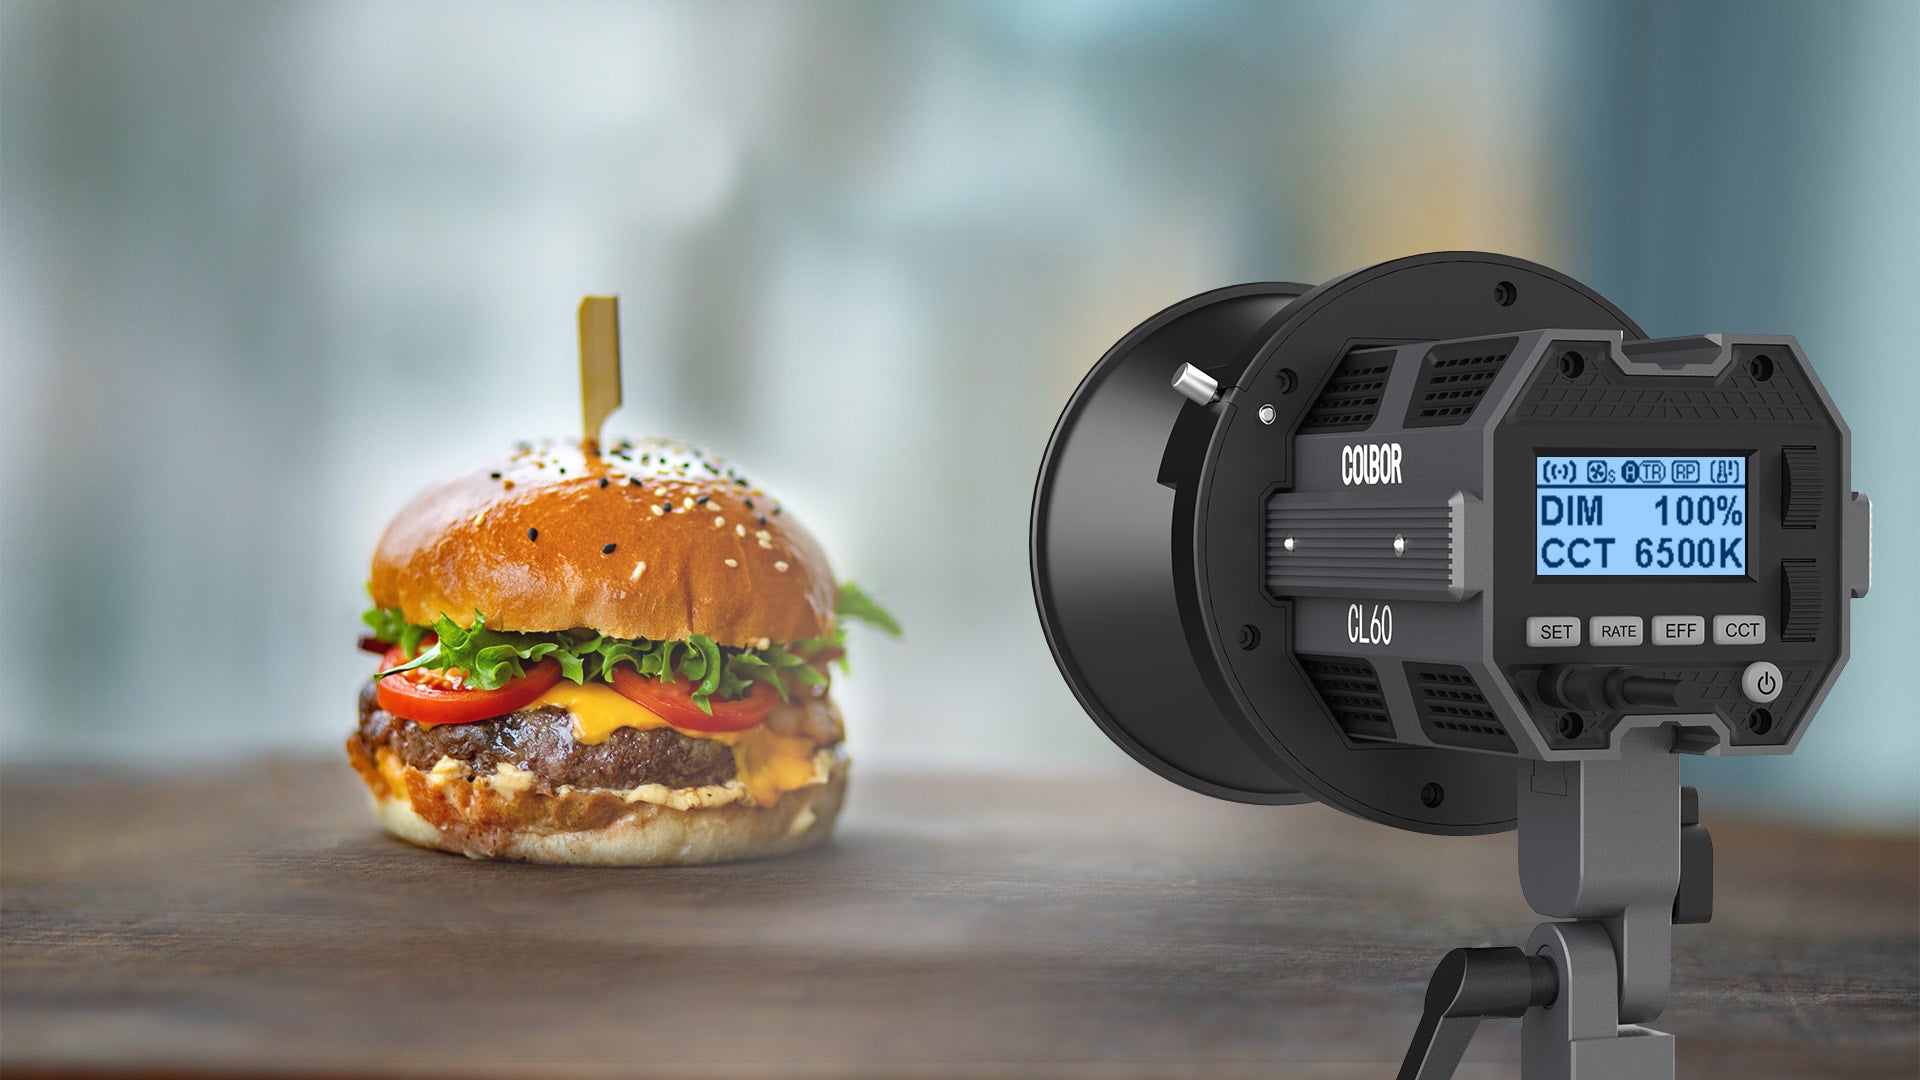 COLBOR CL60 LED continuous light offers lighting for food photography.